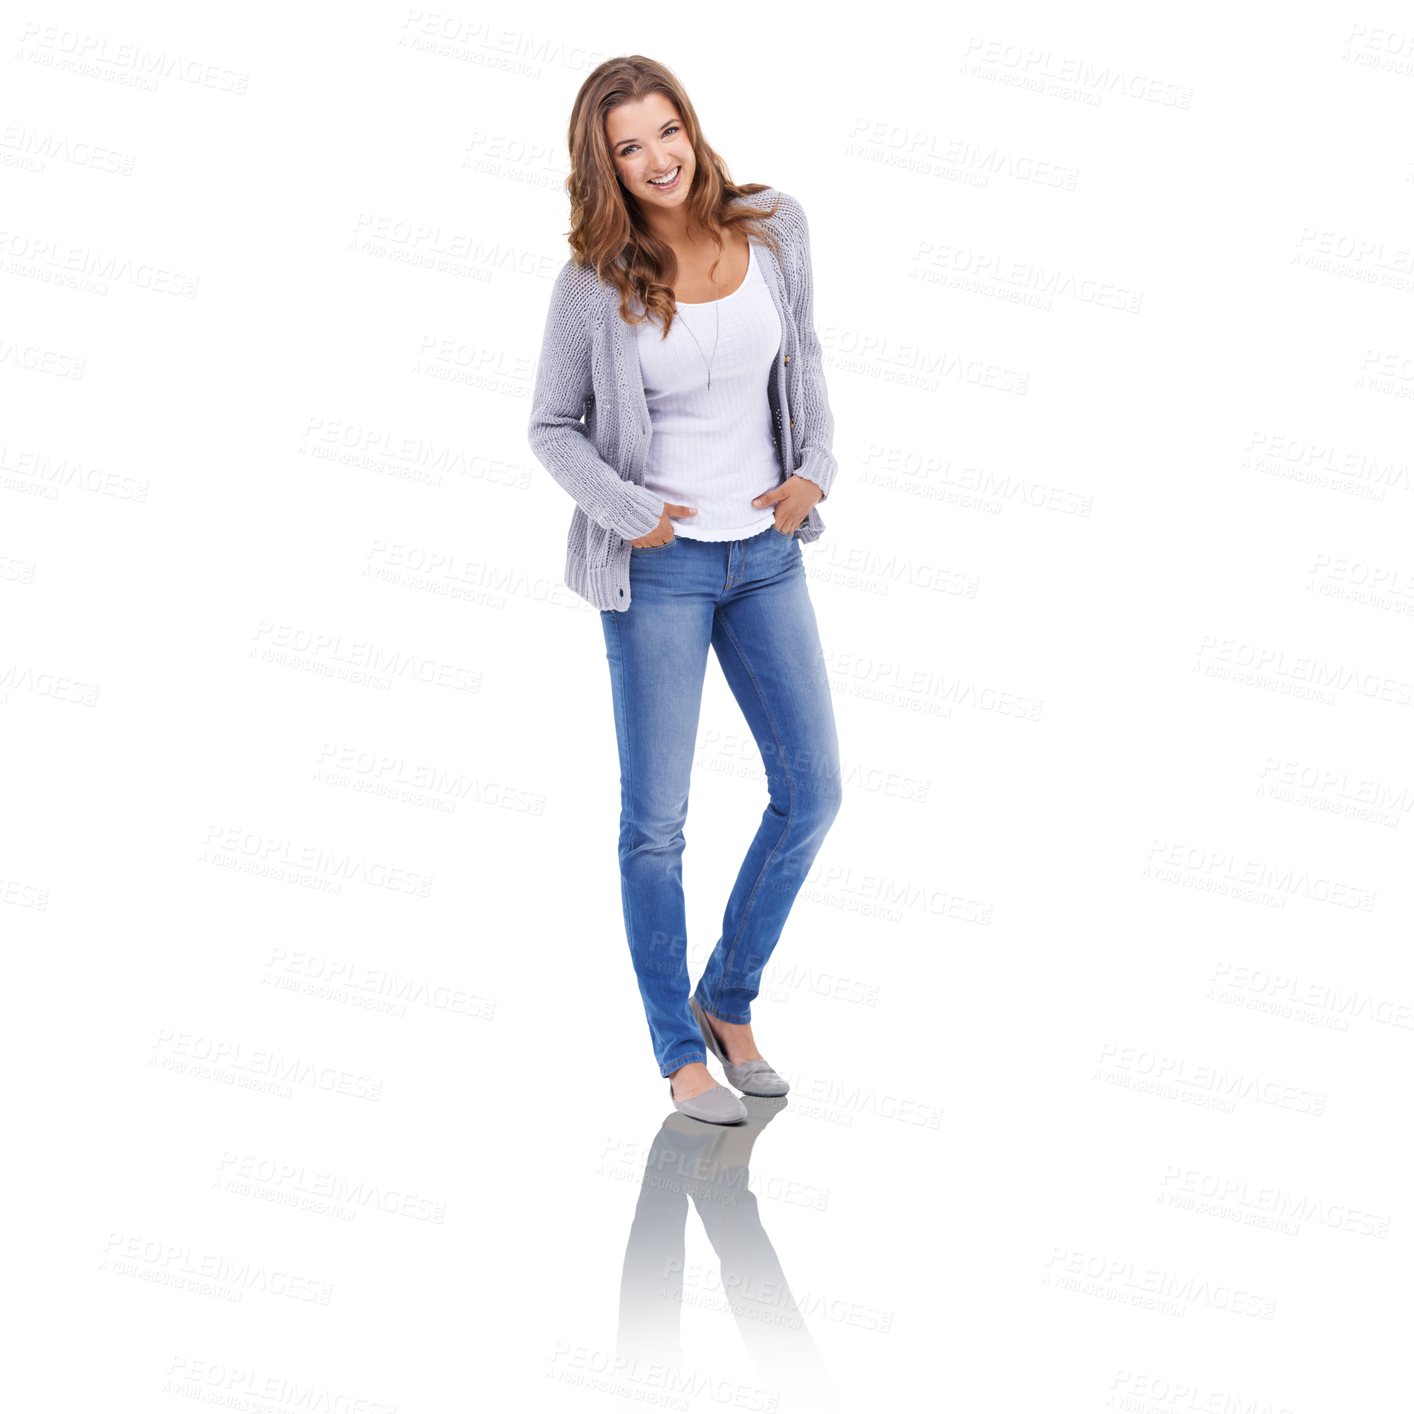 Buy stock photo Happy, fashion and portrait of woman with casual, clothes or confidence on isolated, transparent and png background. Style, smile and fashionable female model posing in comfortable outfit choice